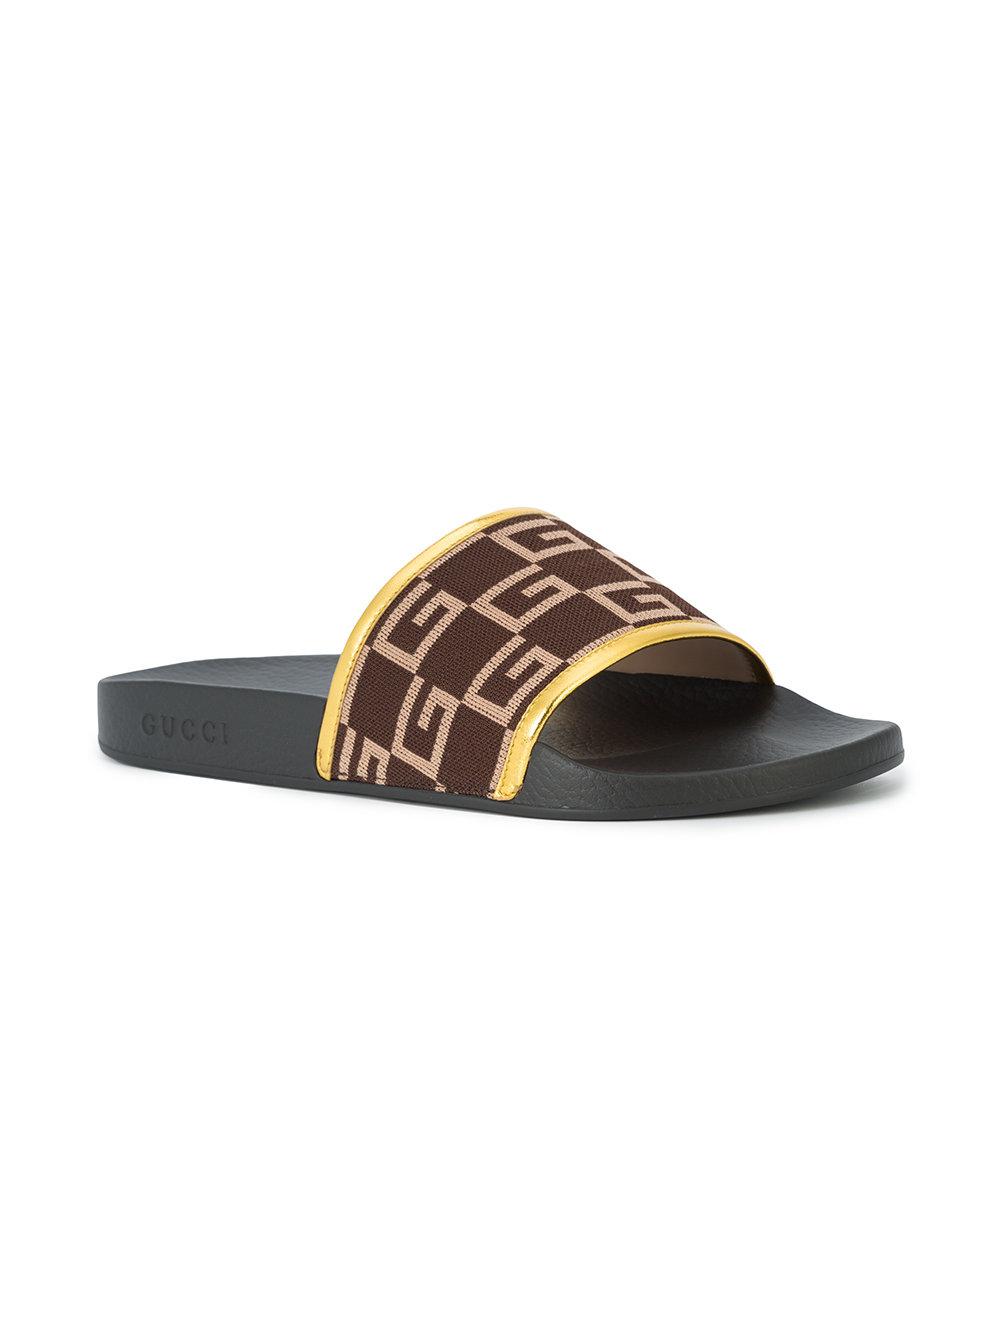 g is for gucci flip flops